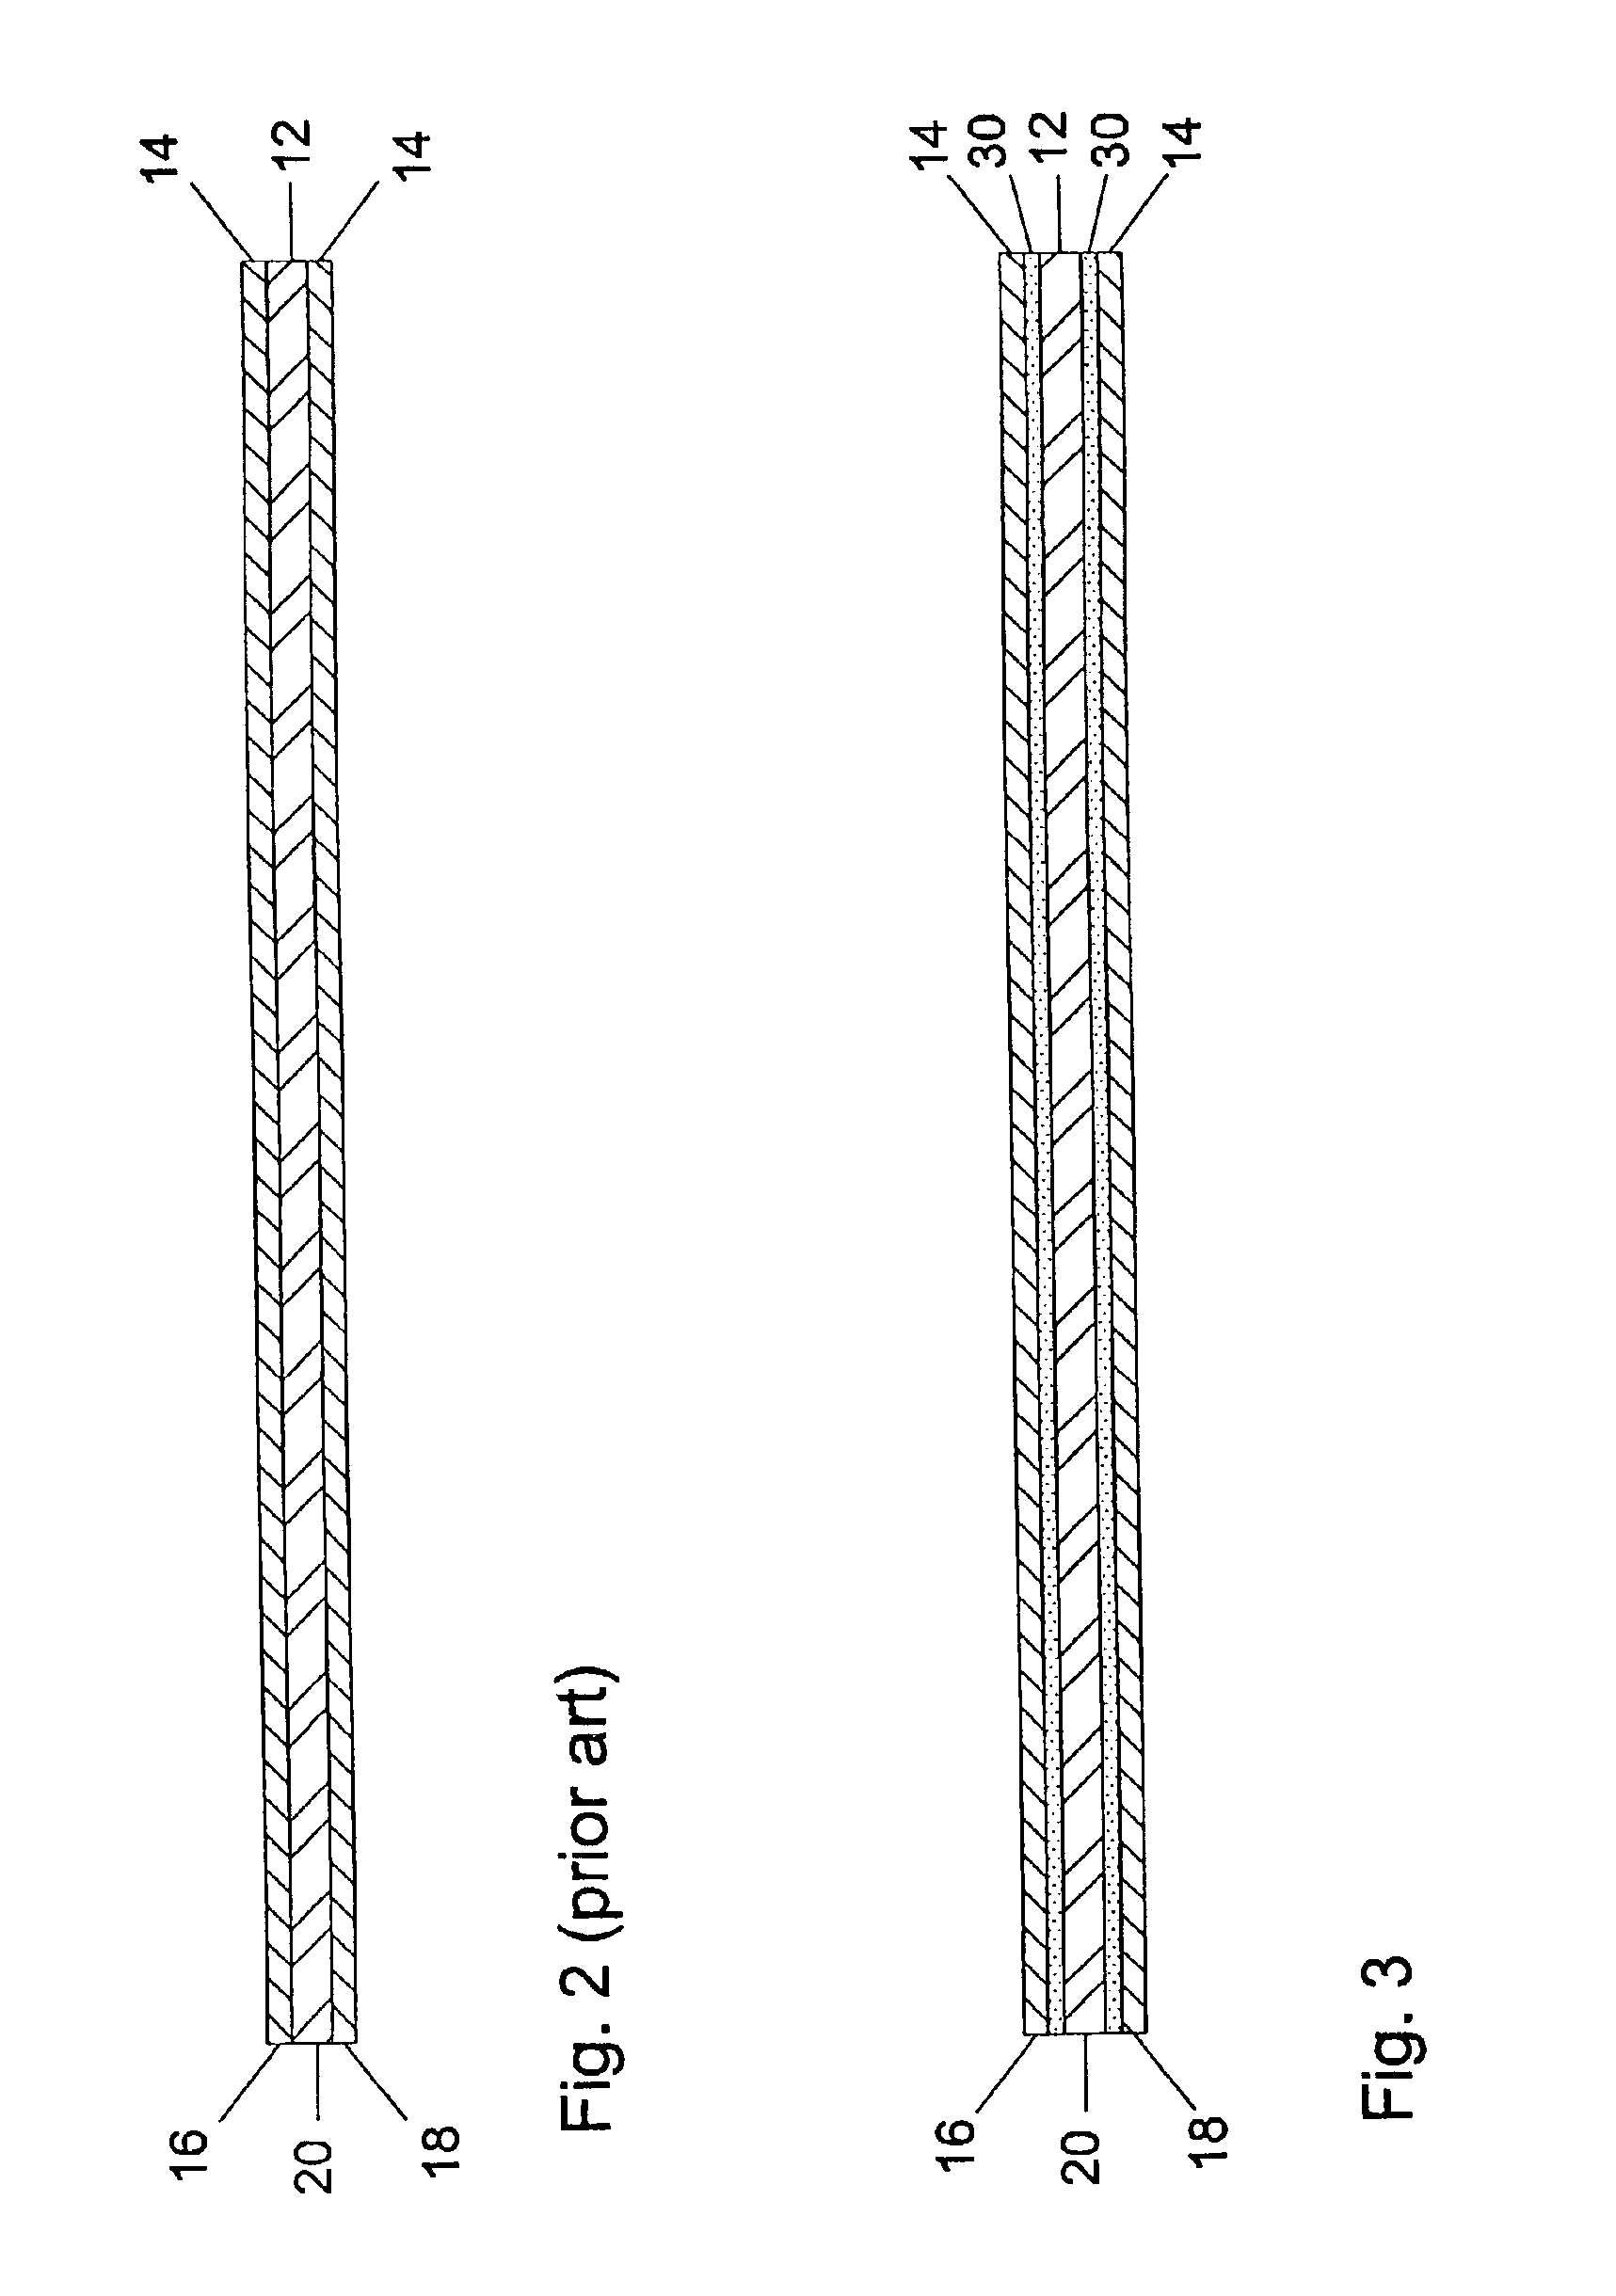 Printed circuit board noise attenuation using lossy conductors